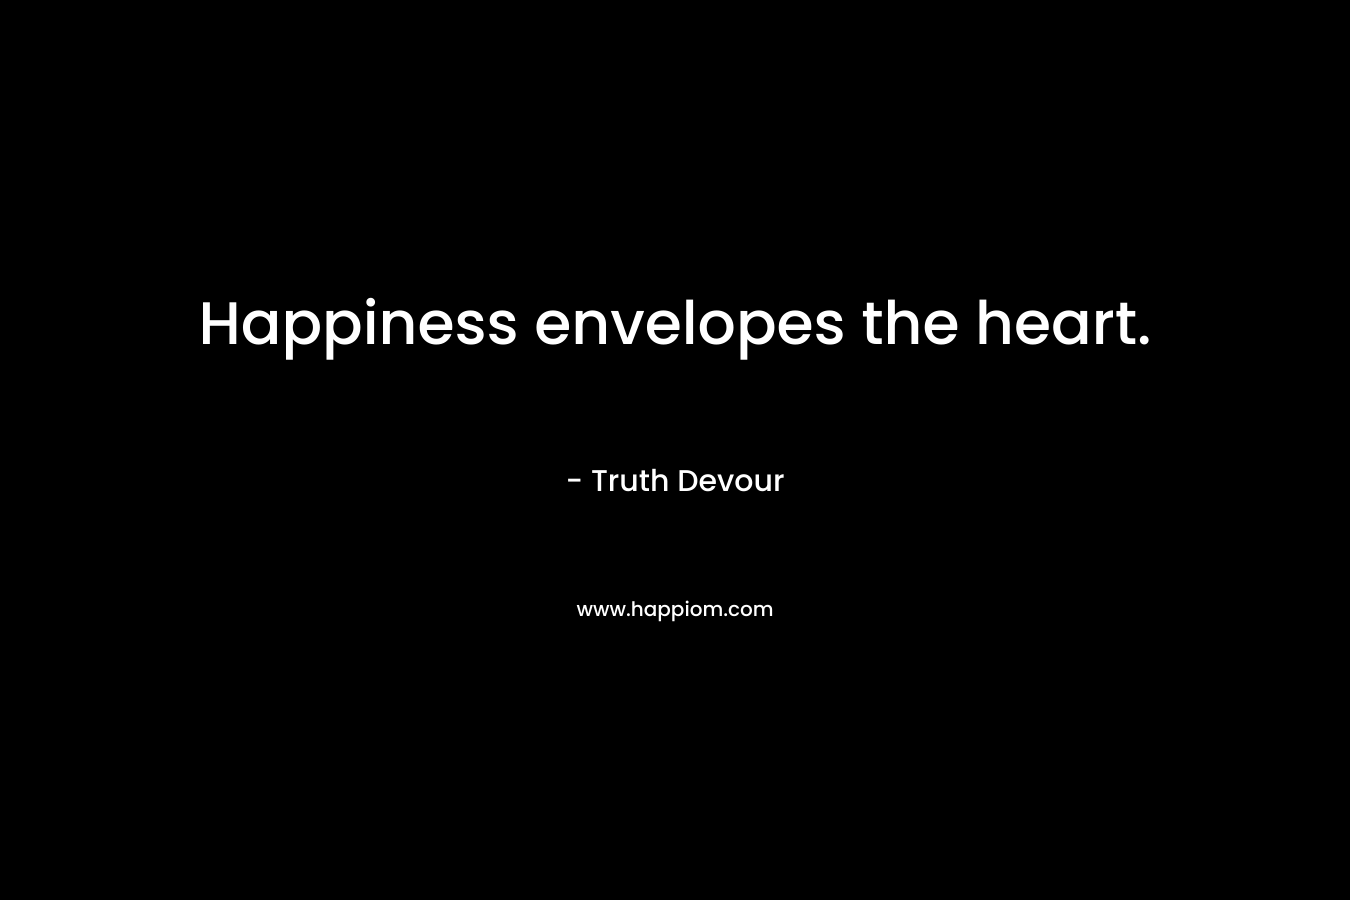 Happiness envelopes the heart.